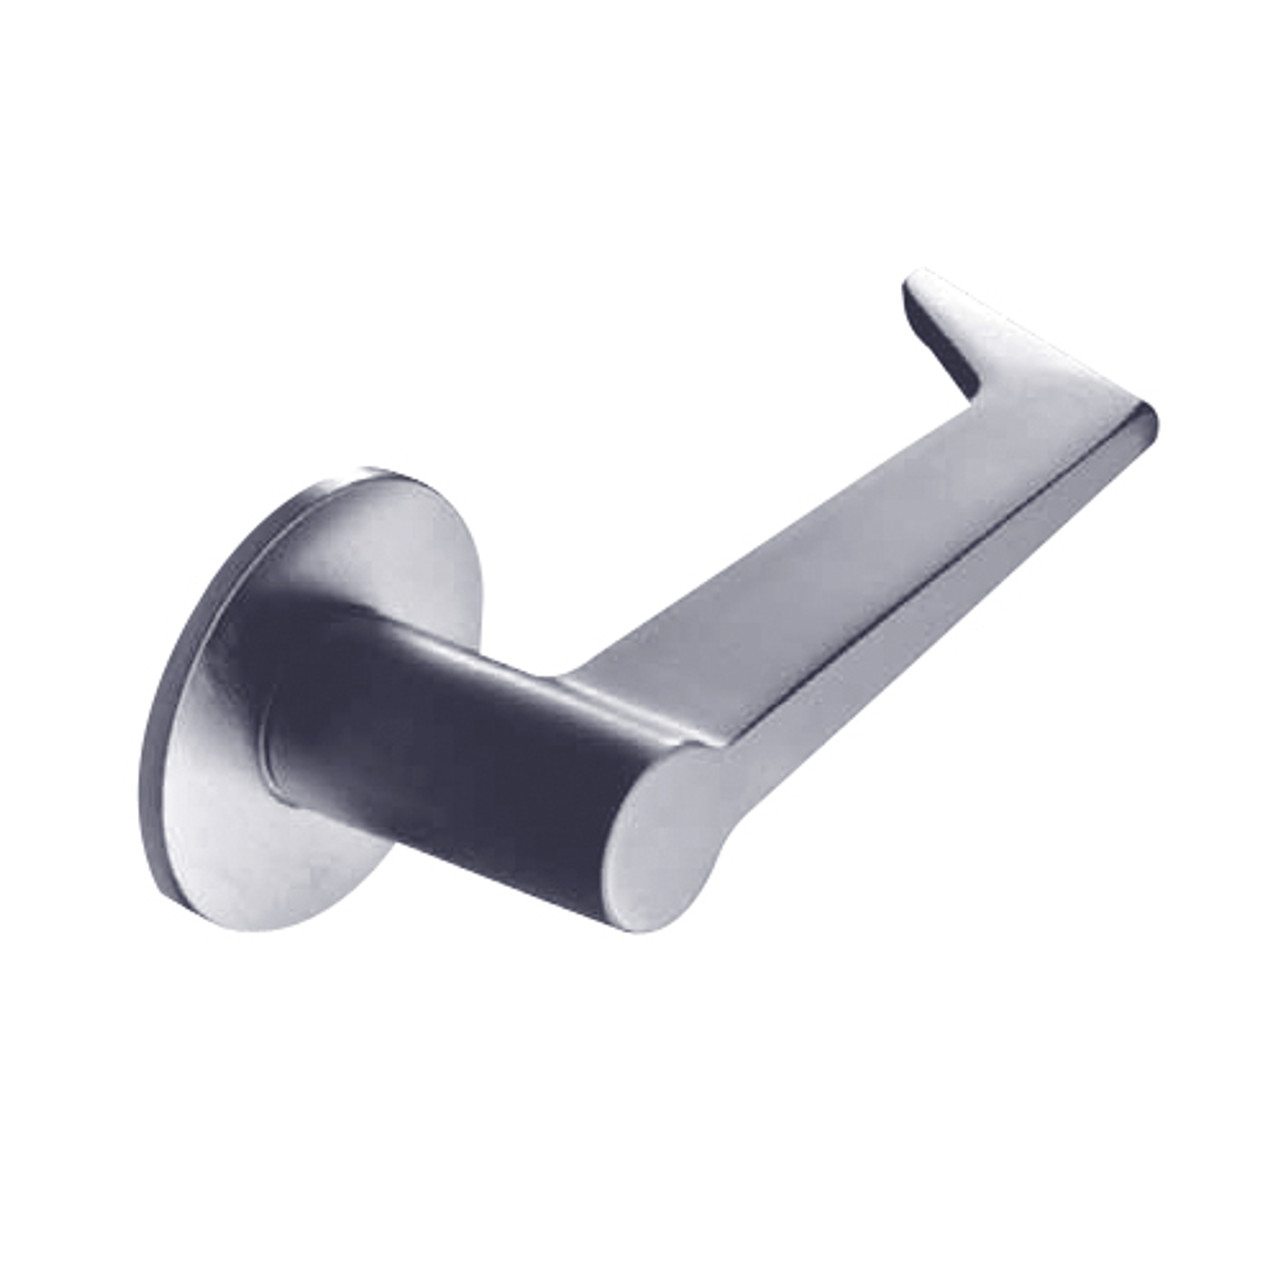 ML2059-ESF-626-LC Corbin Russwin ML2000 Series Mortise Security Storeroom Locksets with Essex Lever in Satin Chrome